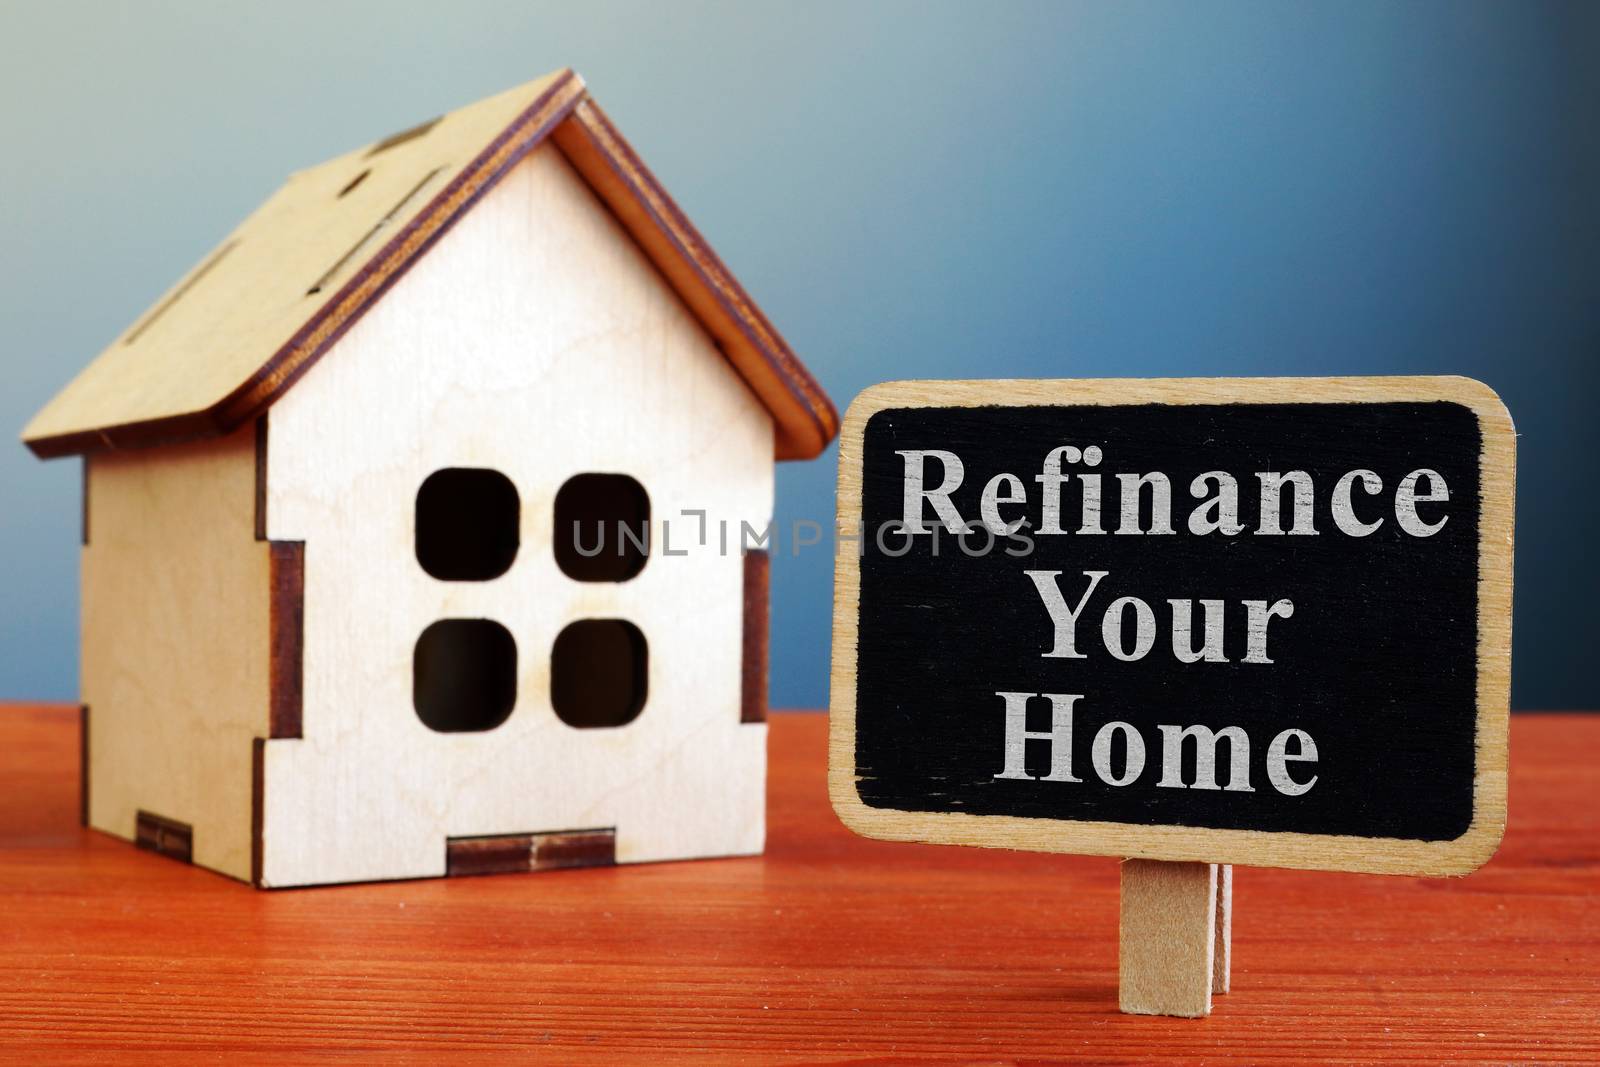 Refinance Your Home mortgage board and wooden house.